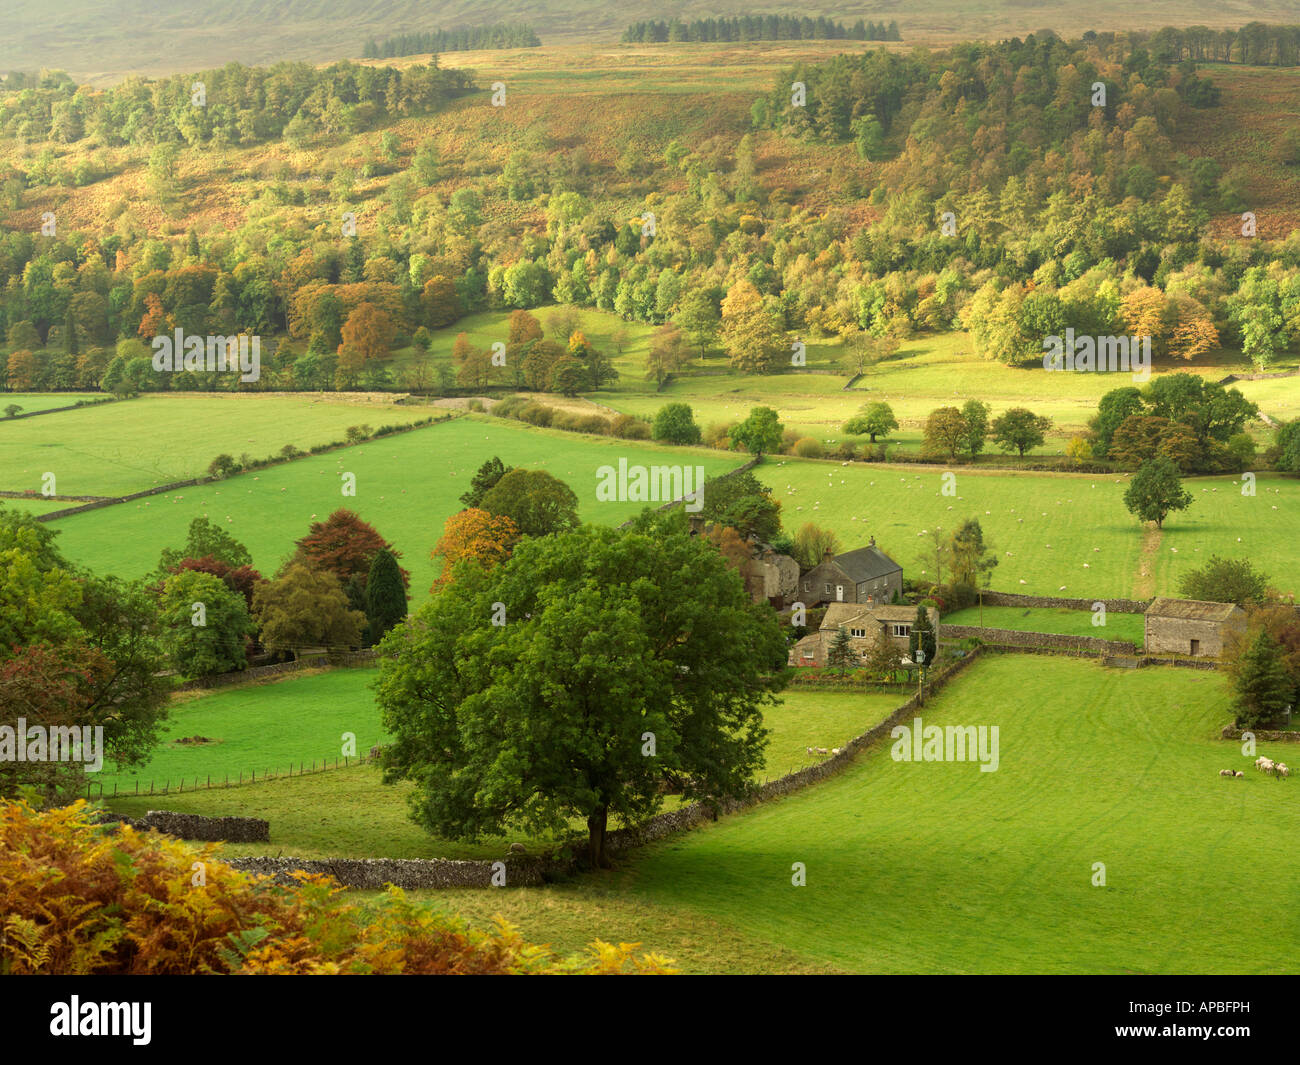 United Kingdom Yorkshire Yorkshire Dales National Park rural scenic of farm in a country setting early autumn Stock Photo